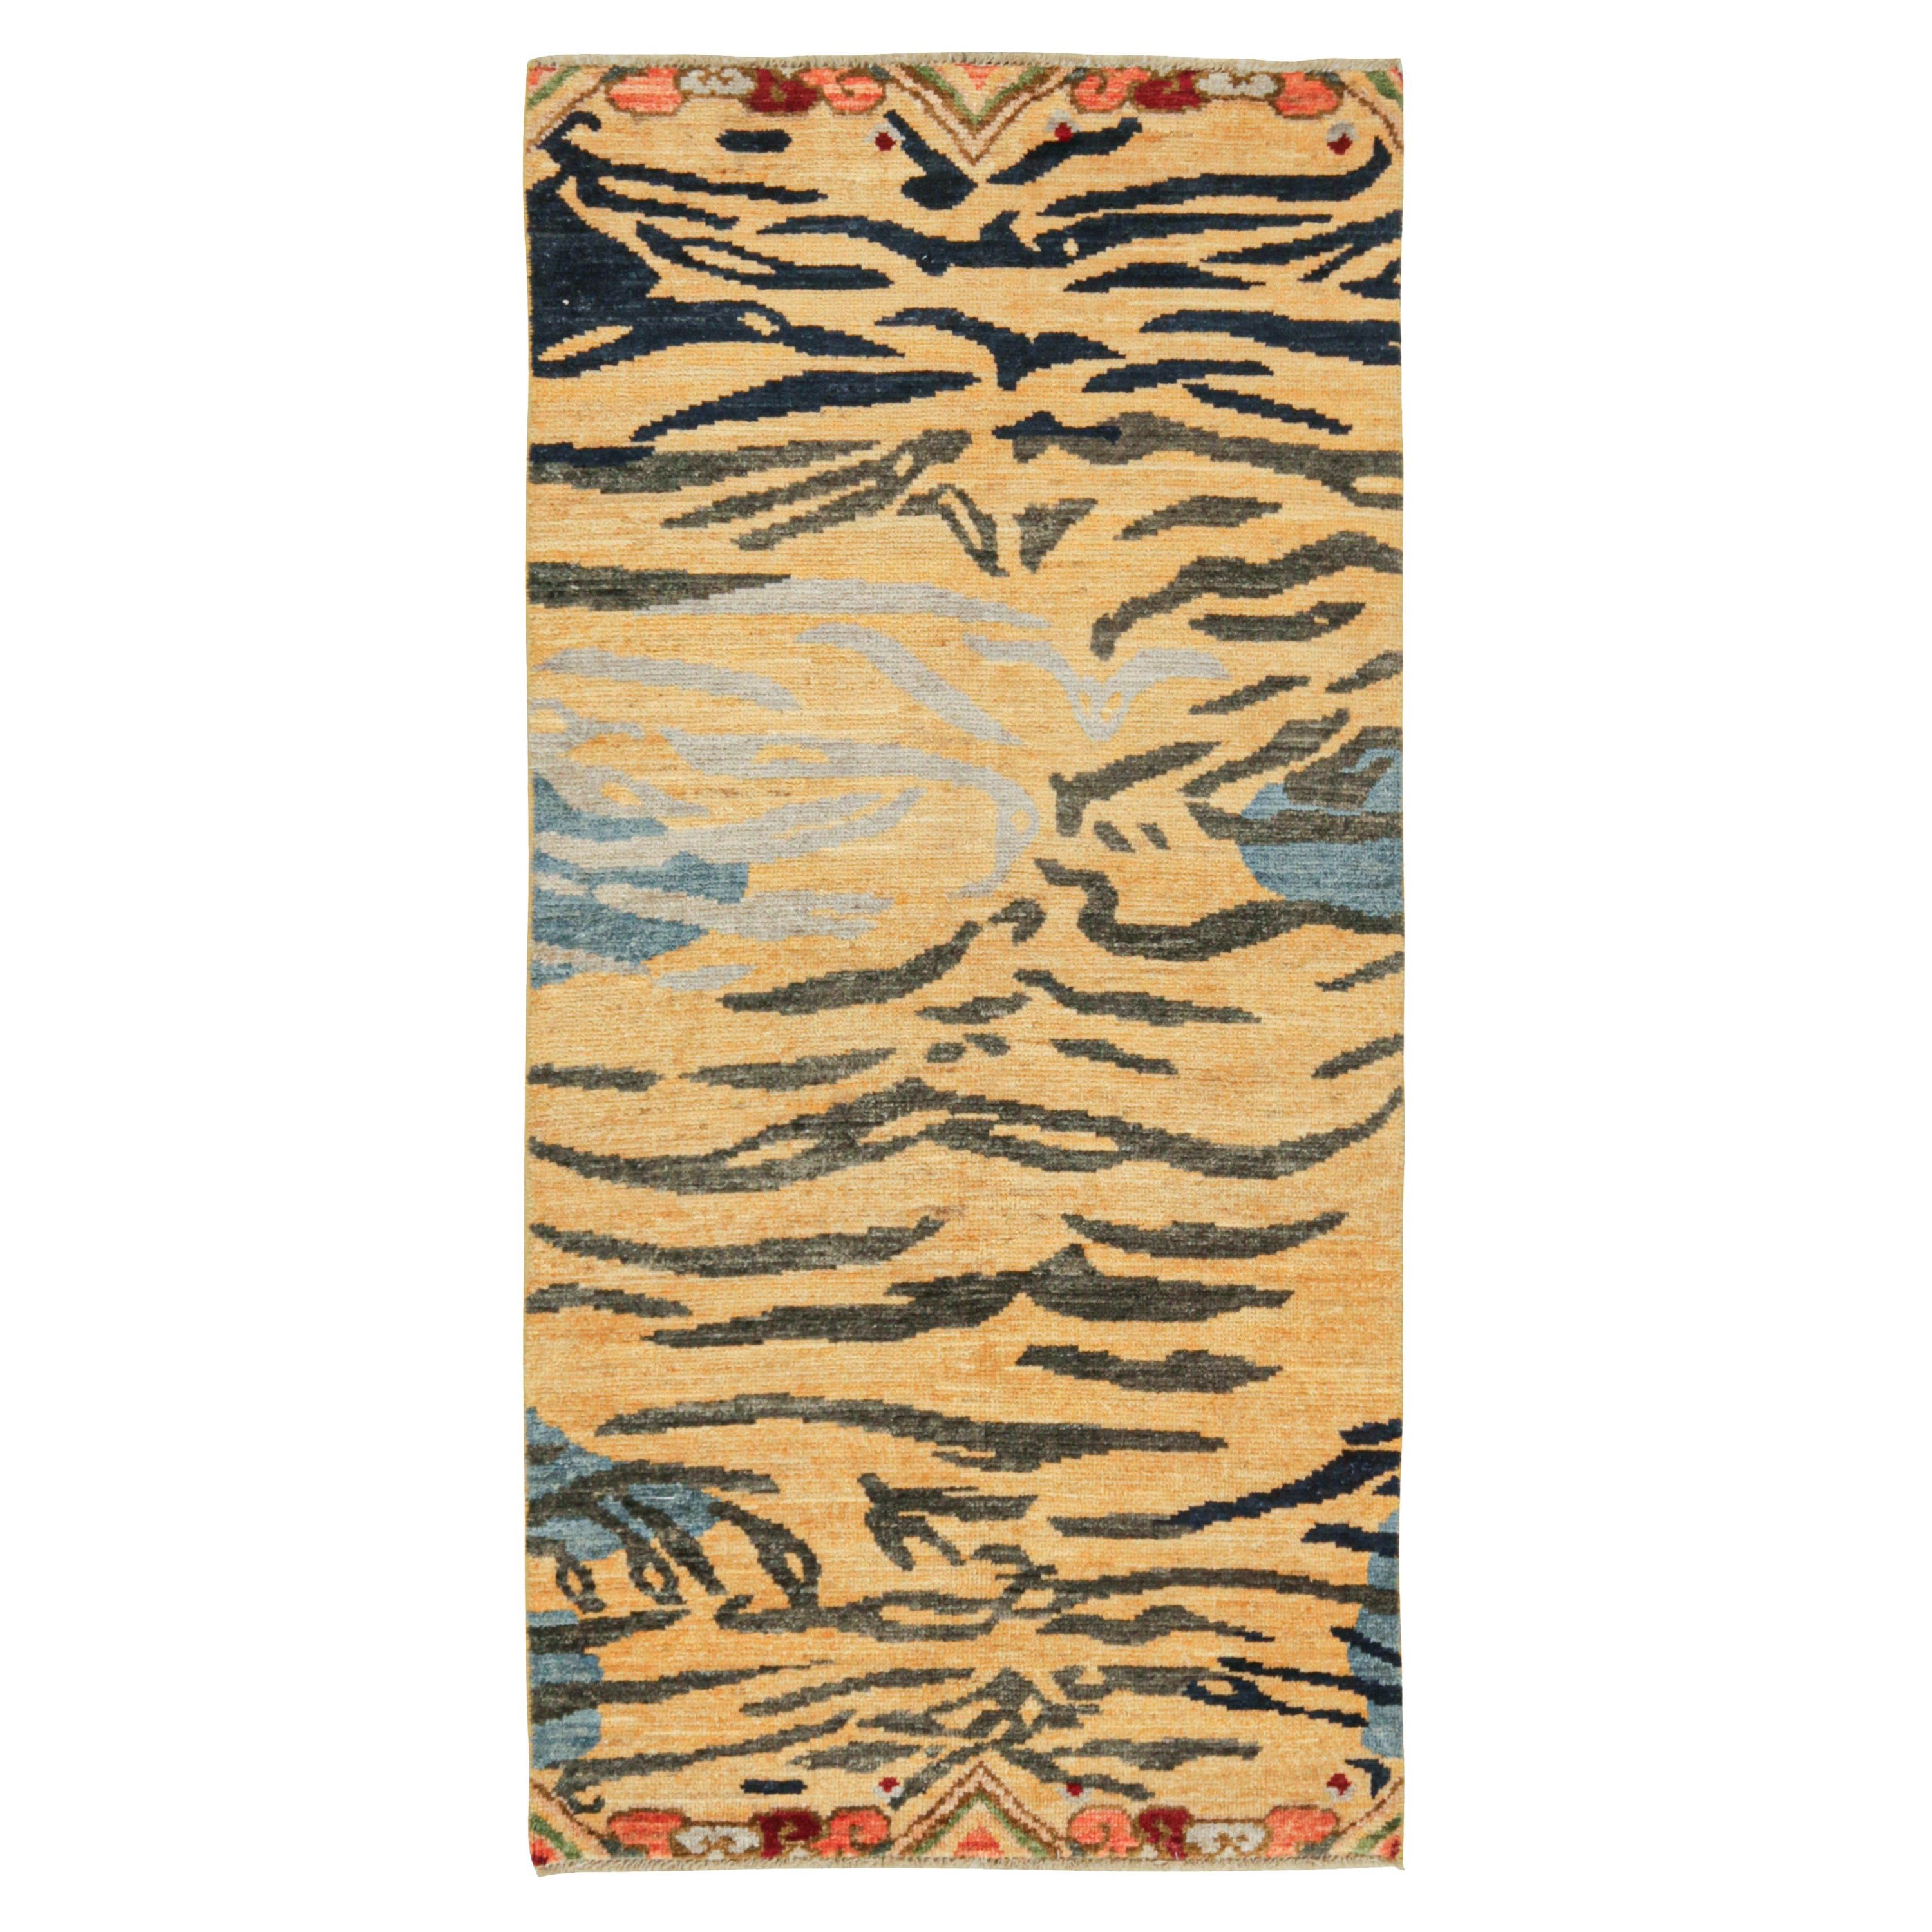 Rug & Kilim’s Classic Style Tiger-Skin Runner in Gold with Grey and Blue Stripe